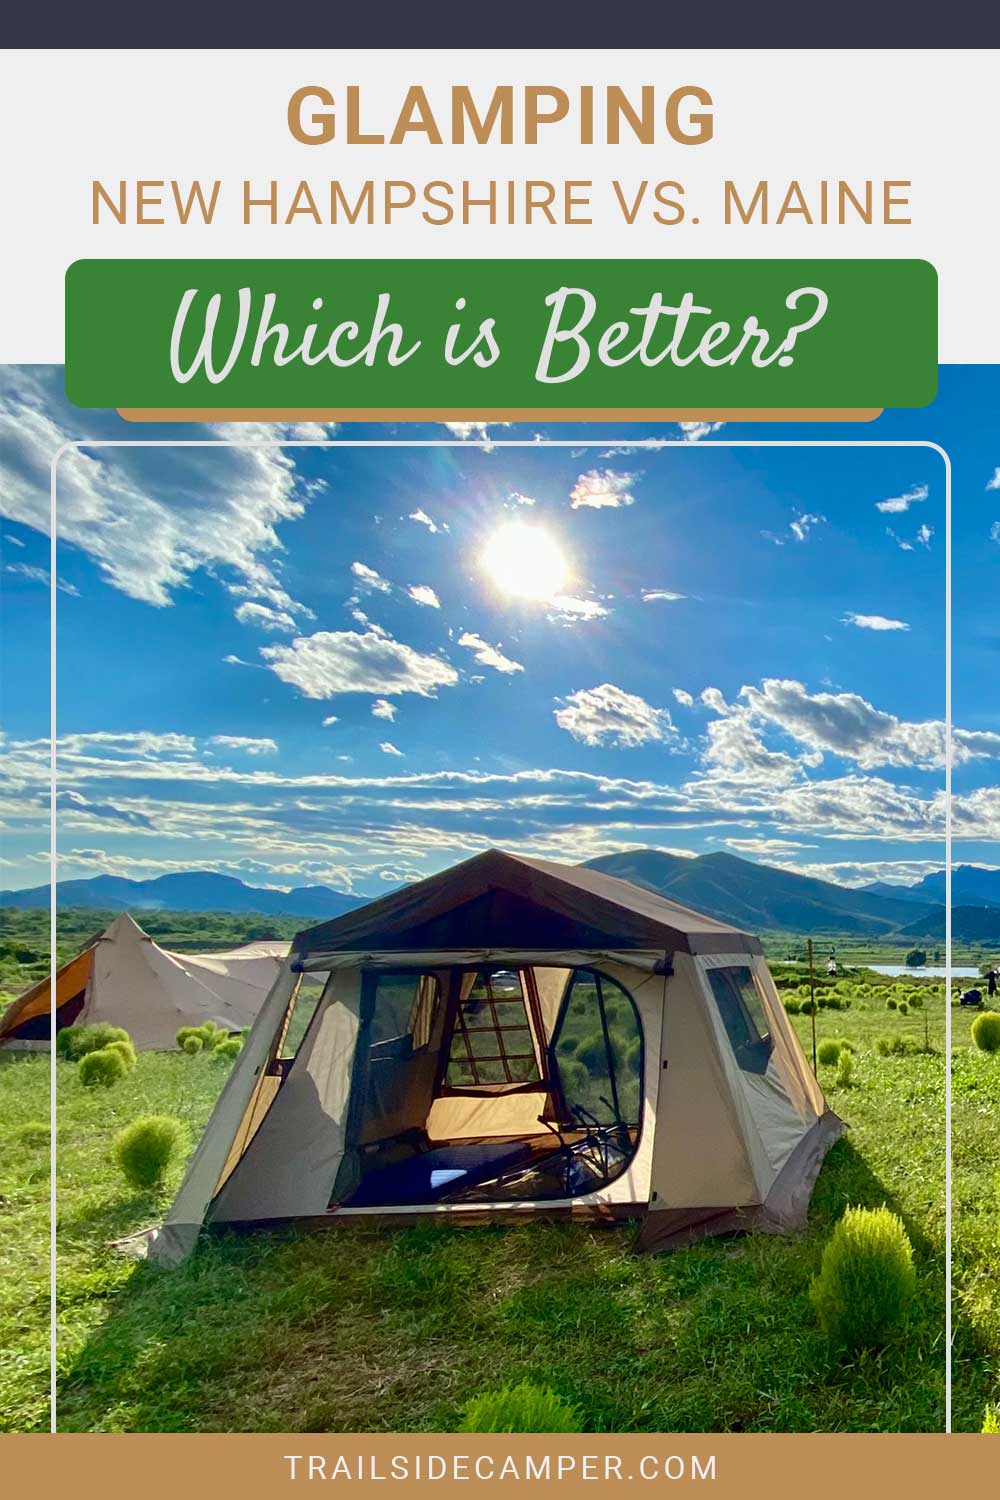 Glamping New Hampshire vs. Maine – Which is Better?